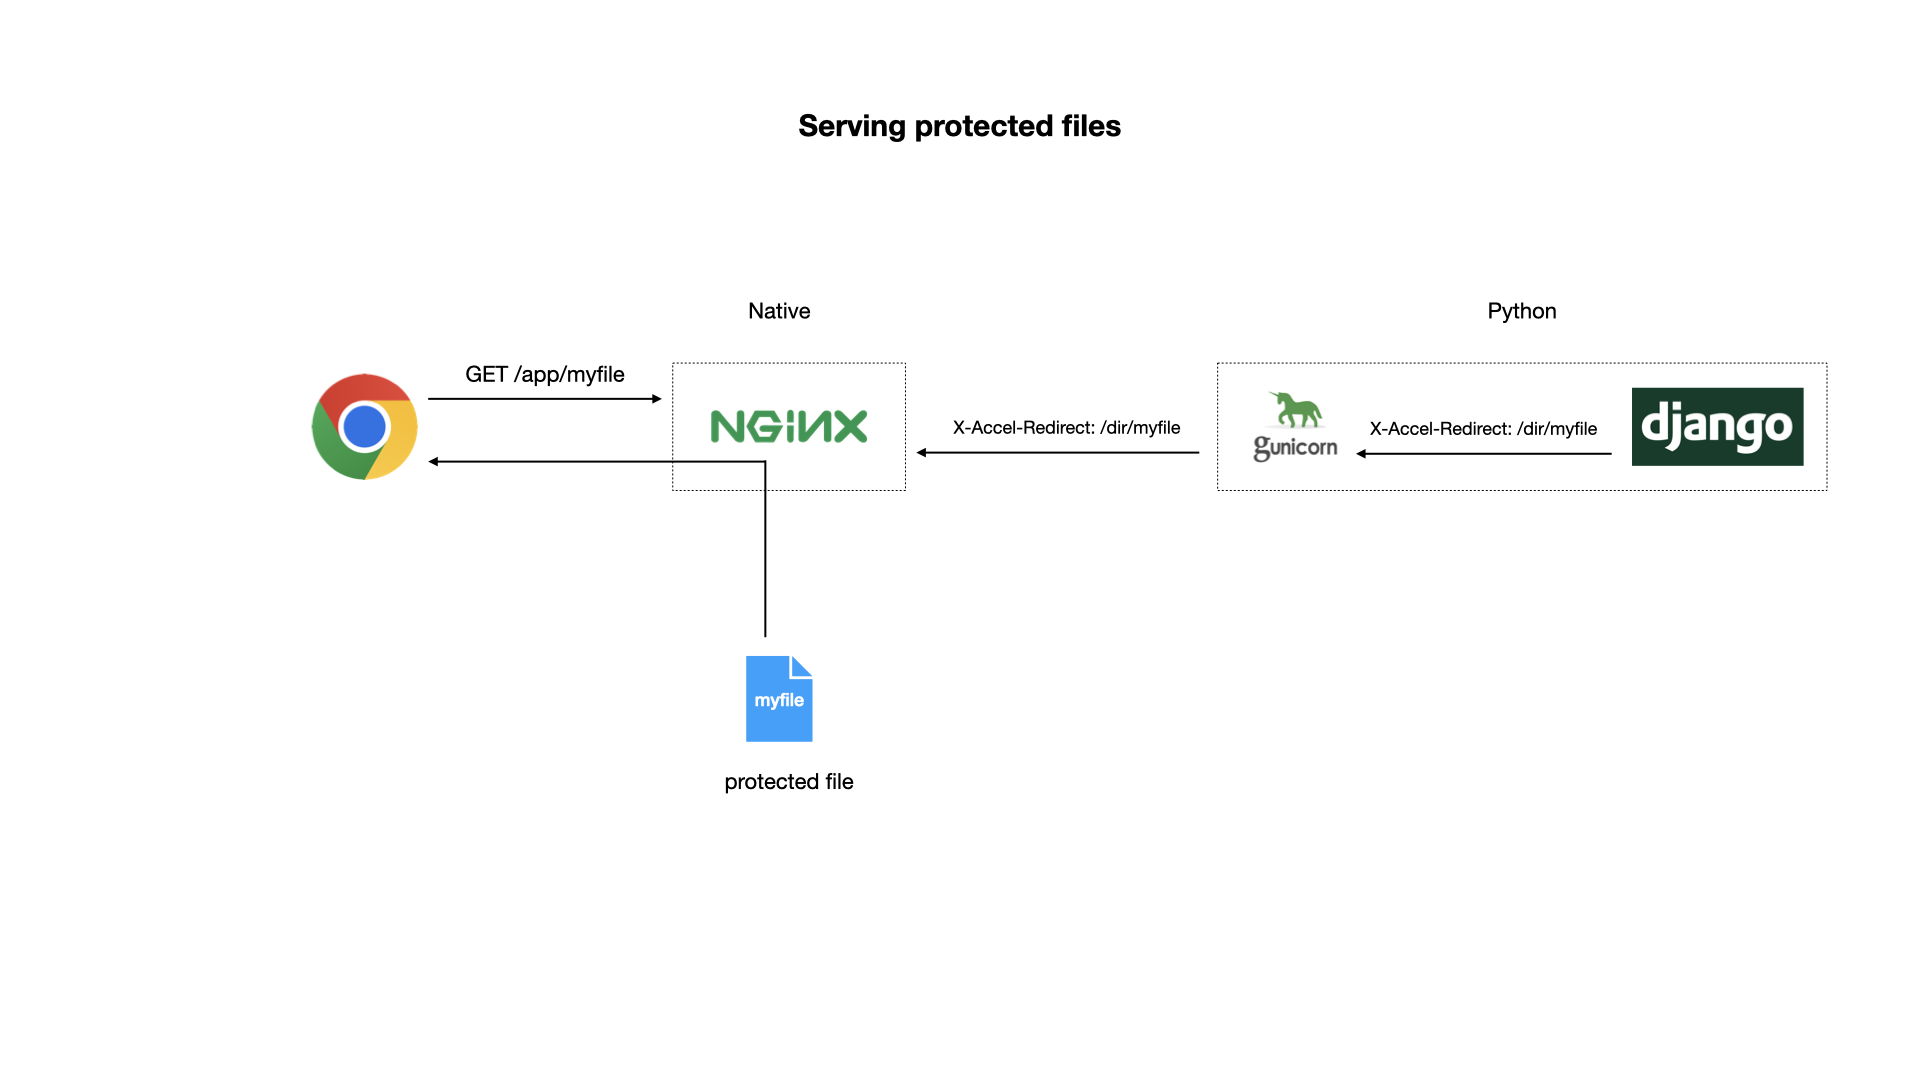 Serving protected files